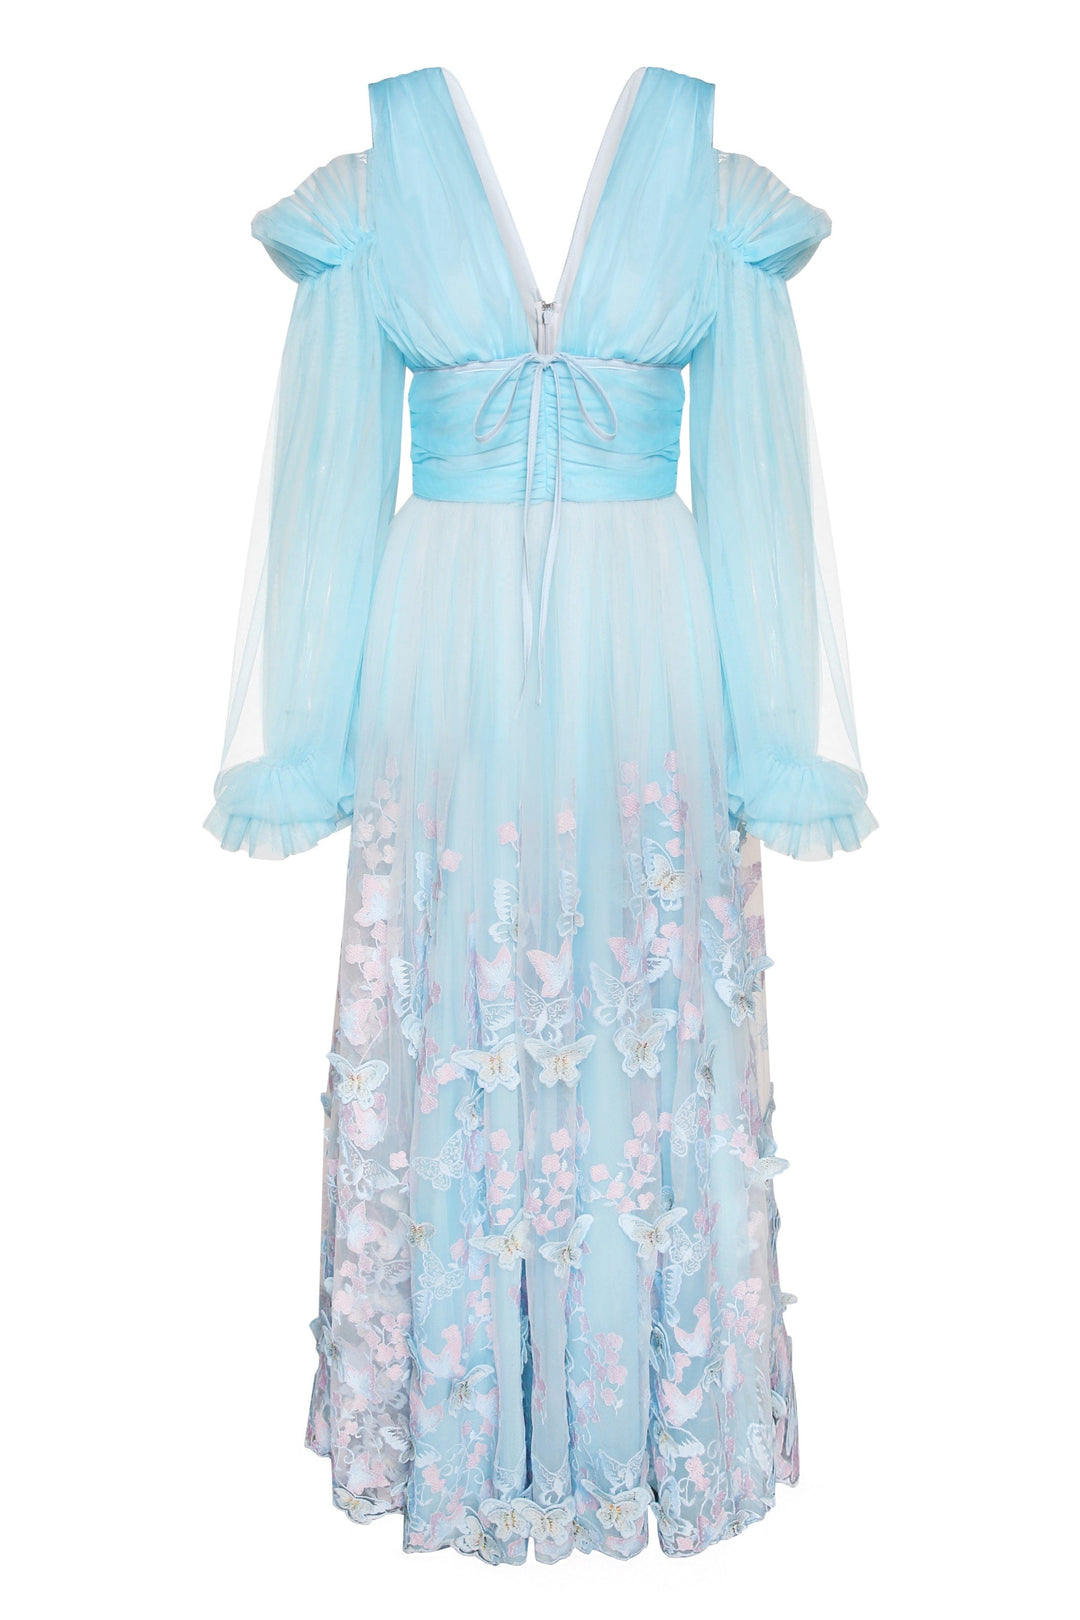 Fairy Tong dress Aurora Butterfly Gown